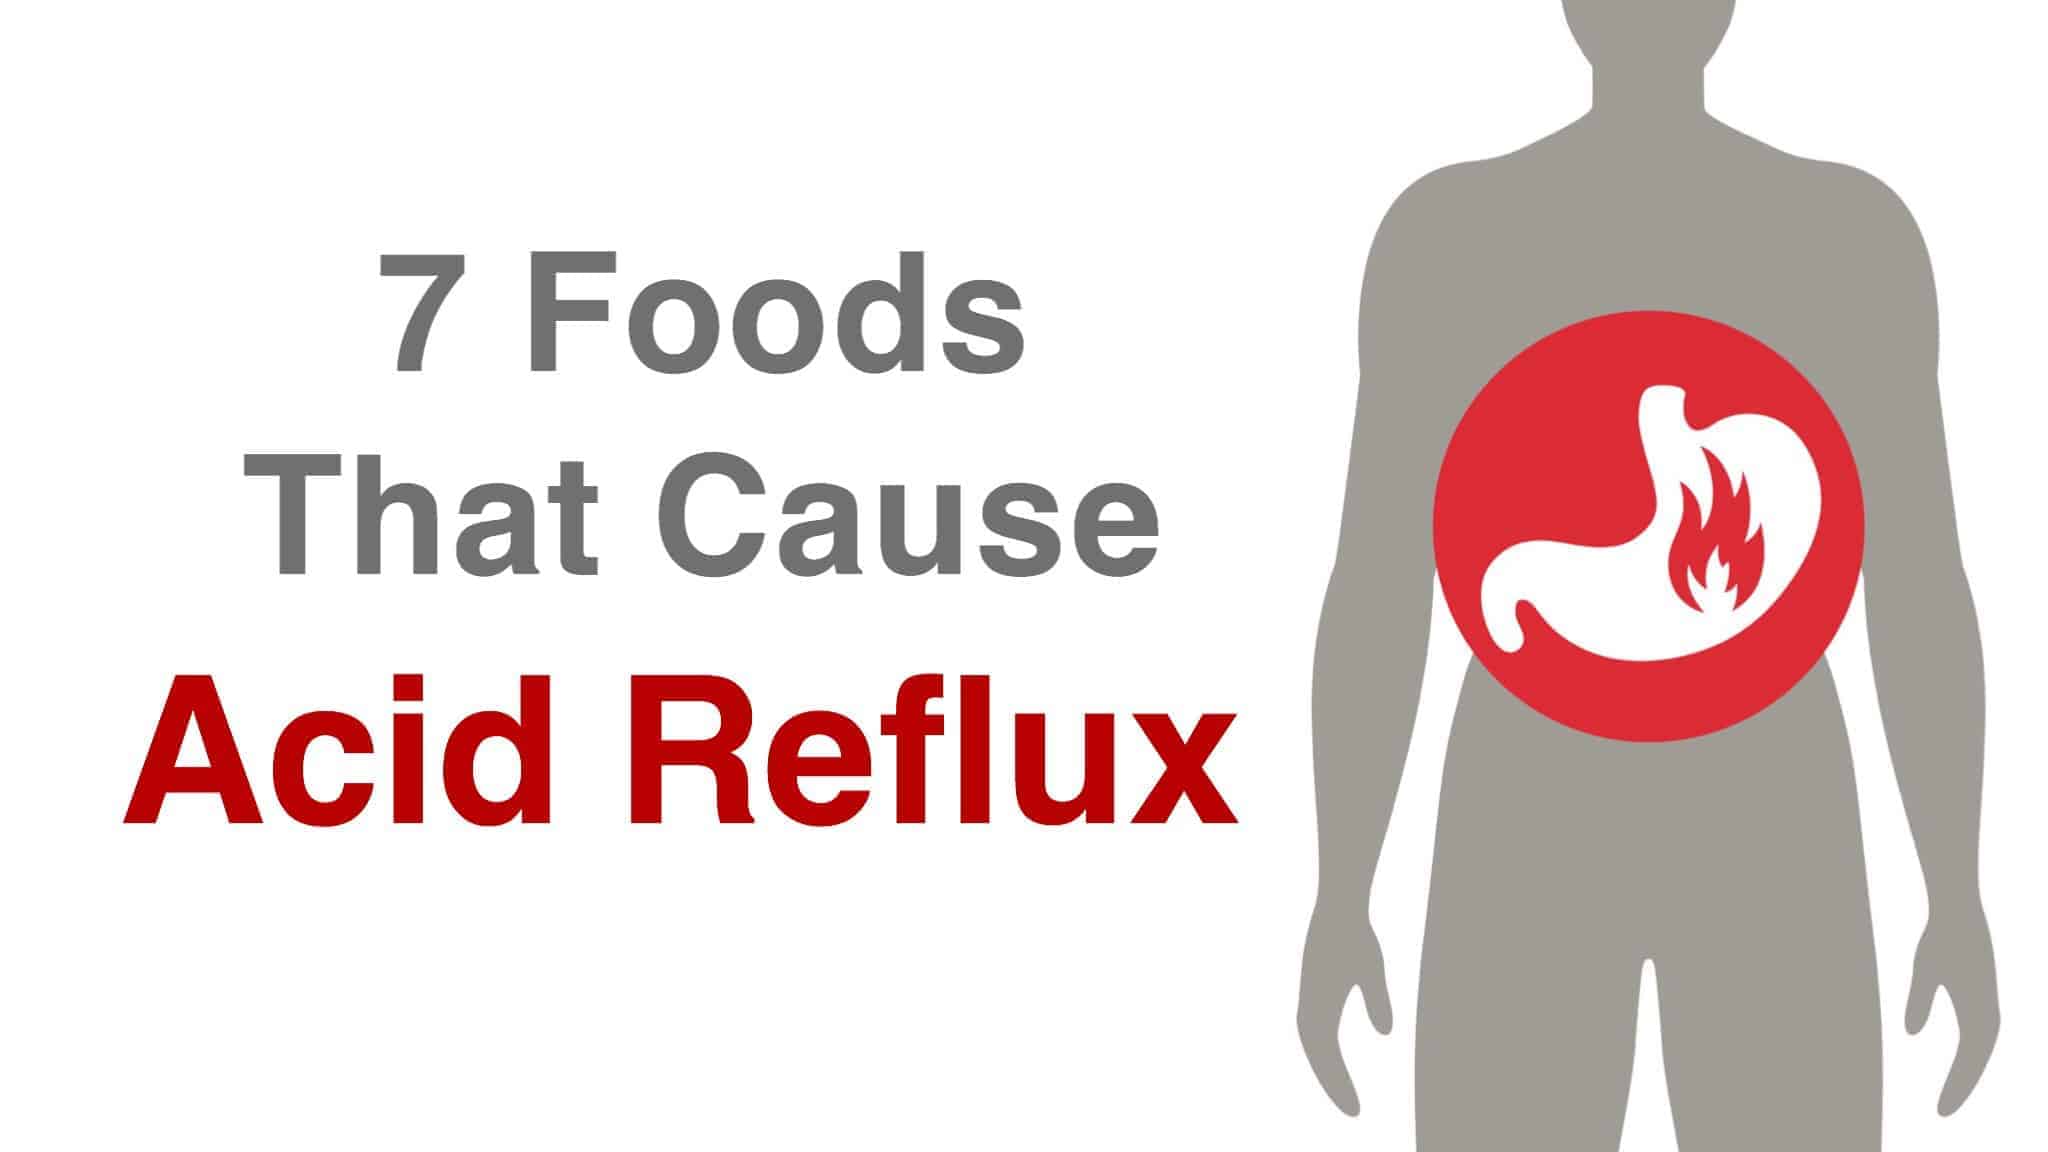 20 Foods That Cause Acid Reflux